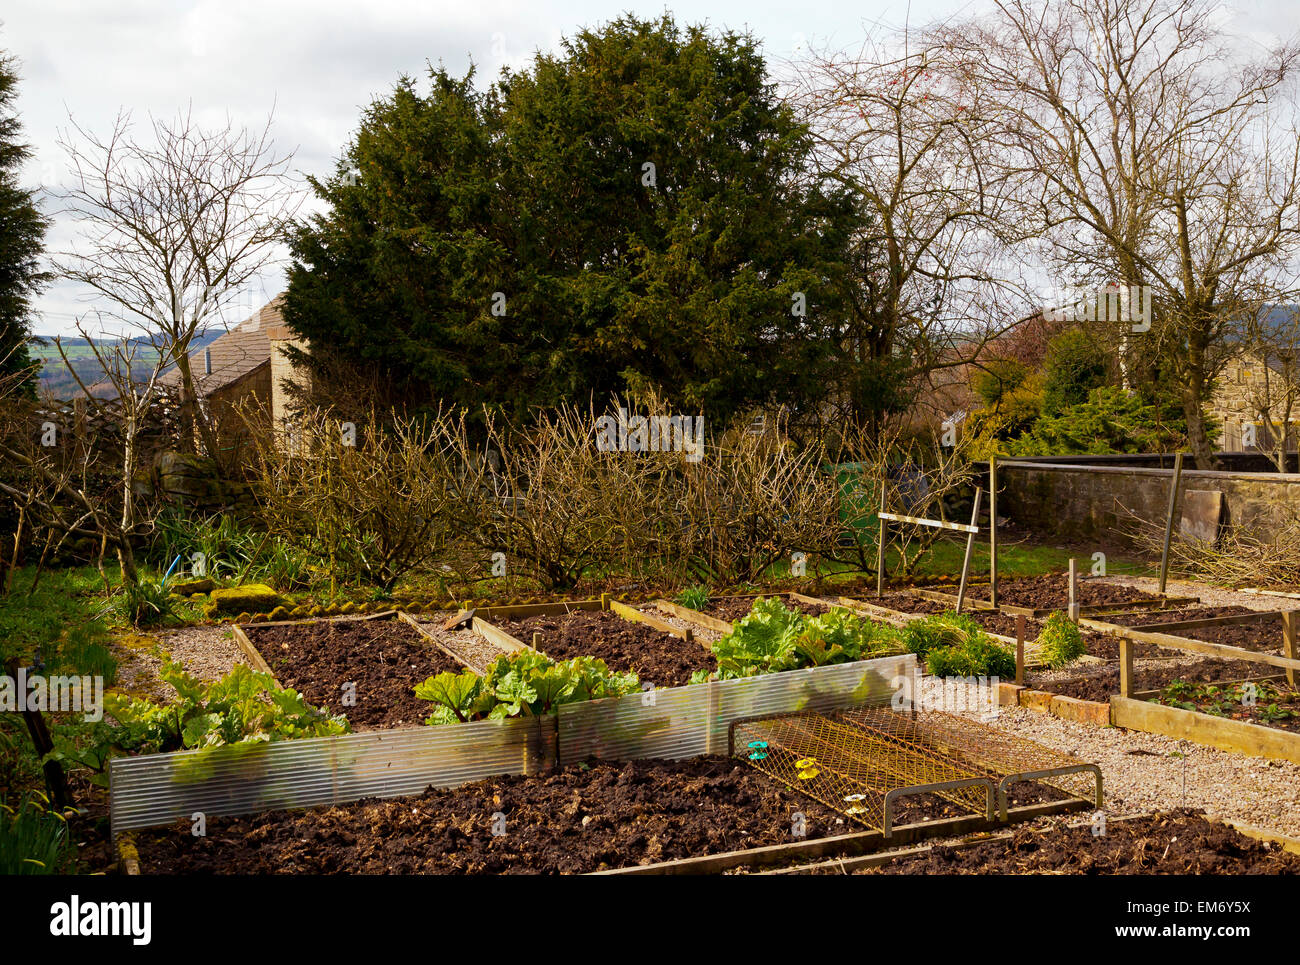 View over raised beds in a garden in early Spring Derbyshire England UK Stock Photo